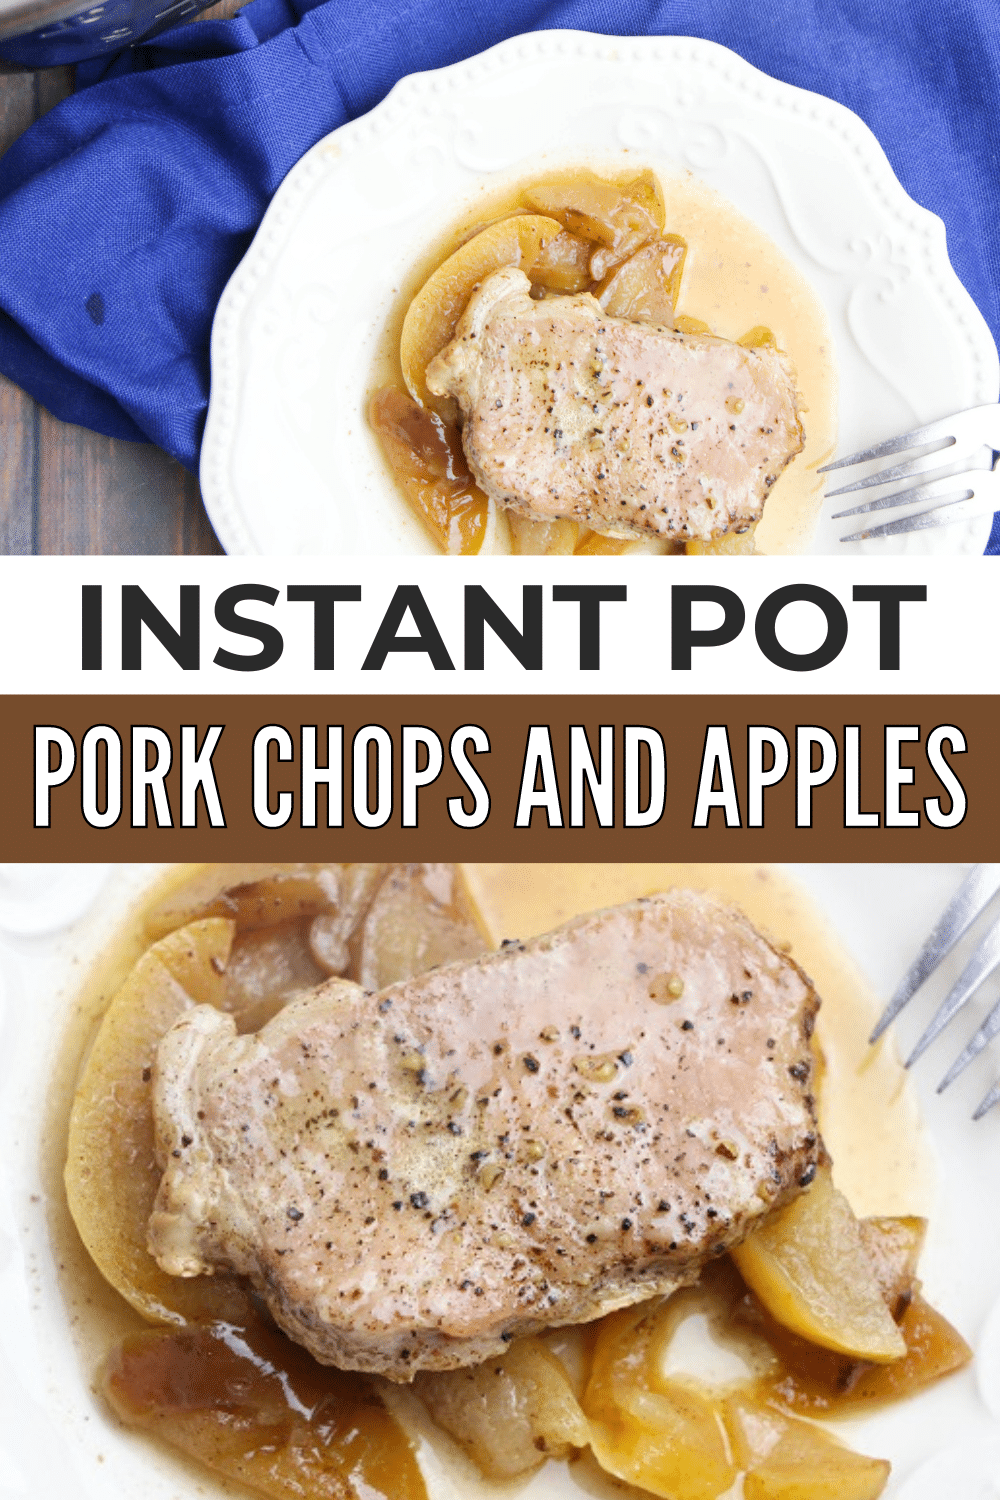 Instant pot pork chops and apples cooked quickly.